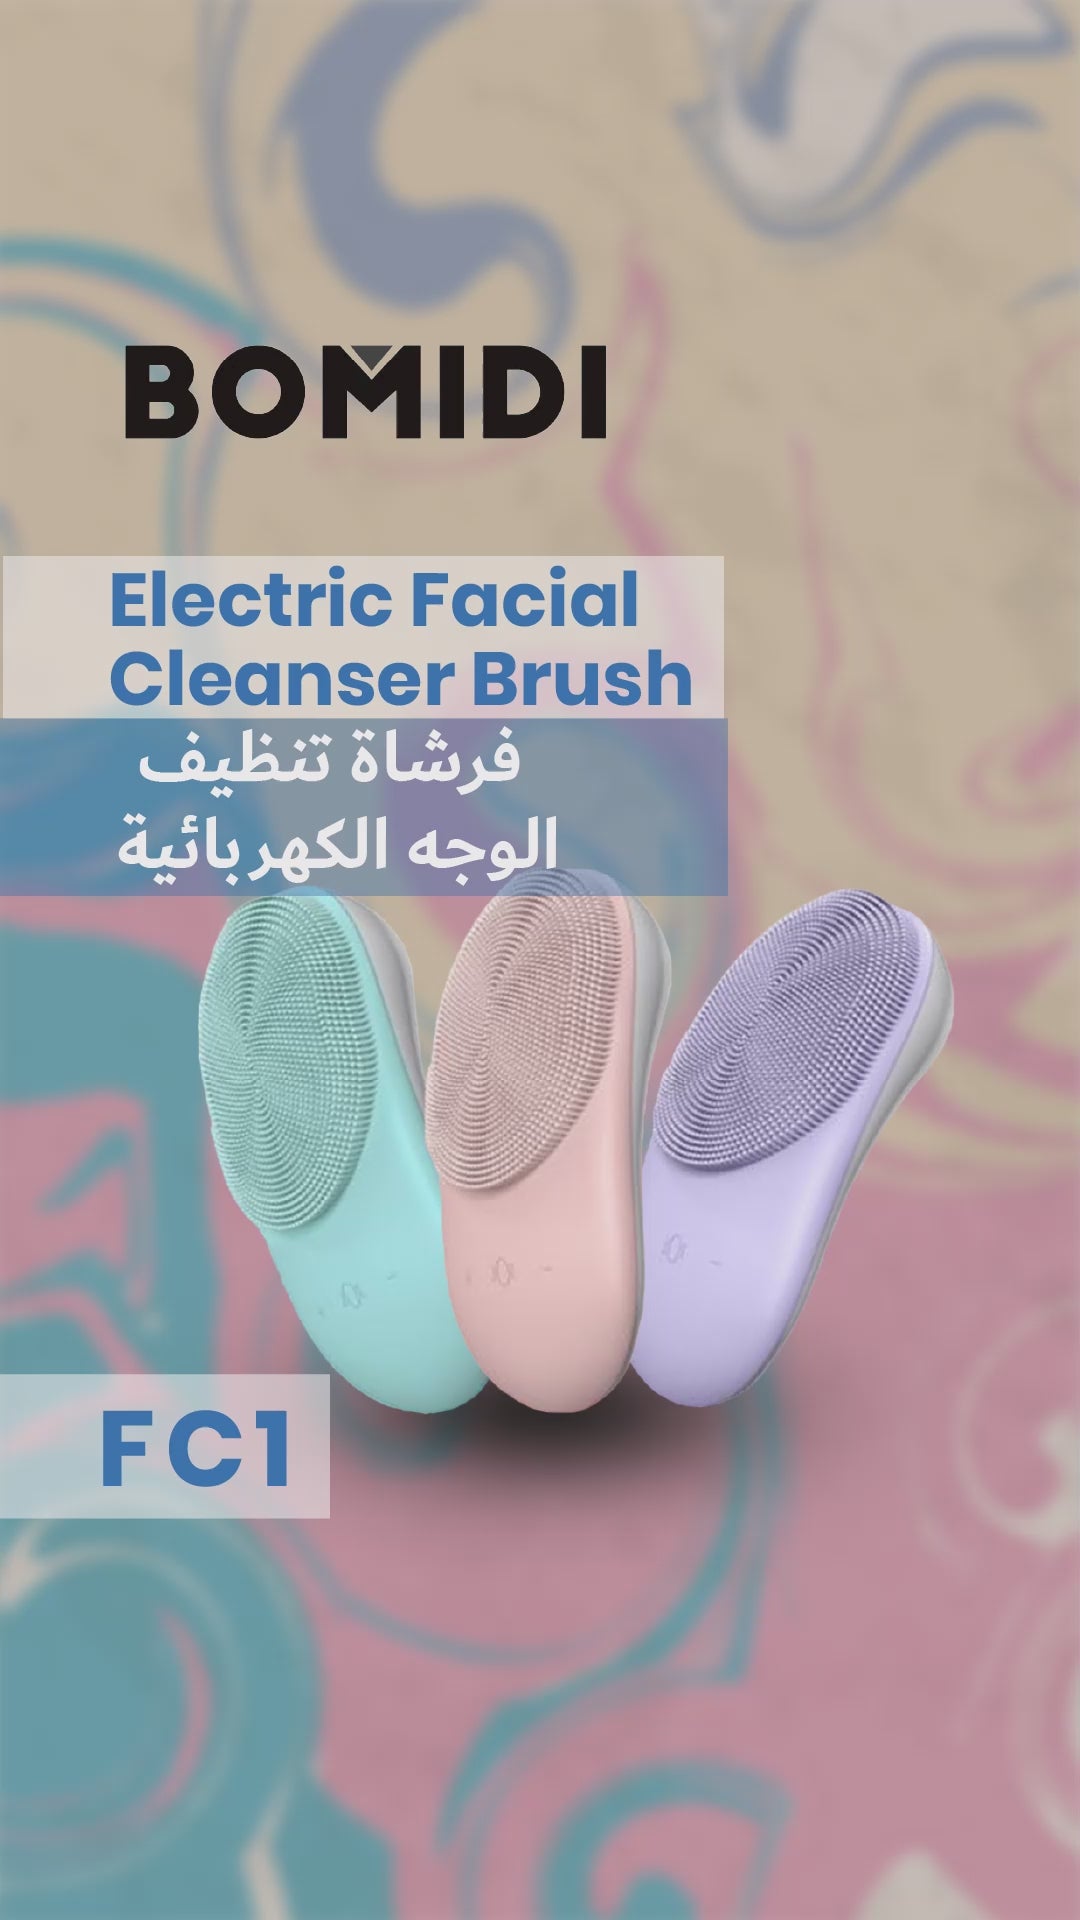 Bomidi FC1 Electric Facial Cleanser Brush With Stand Soft Bristle - Green